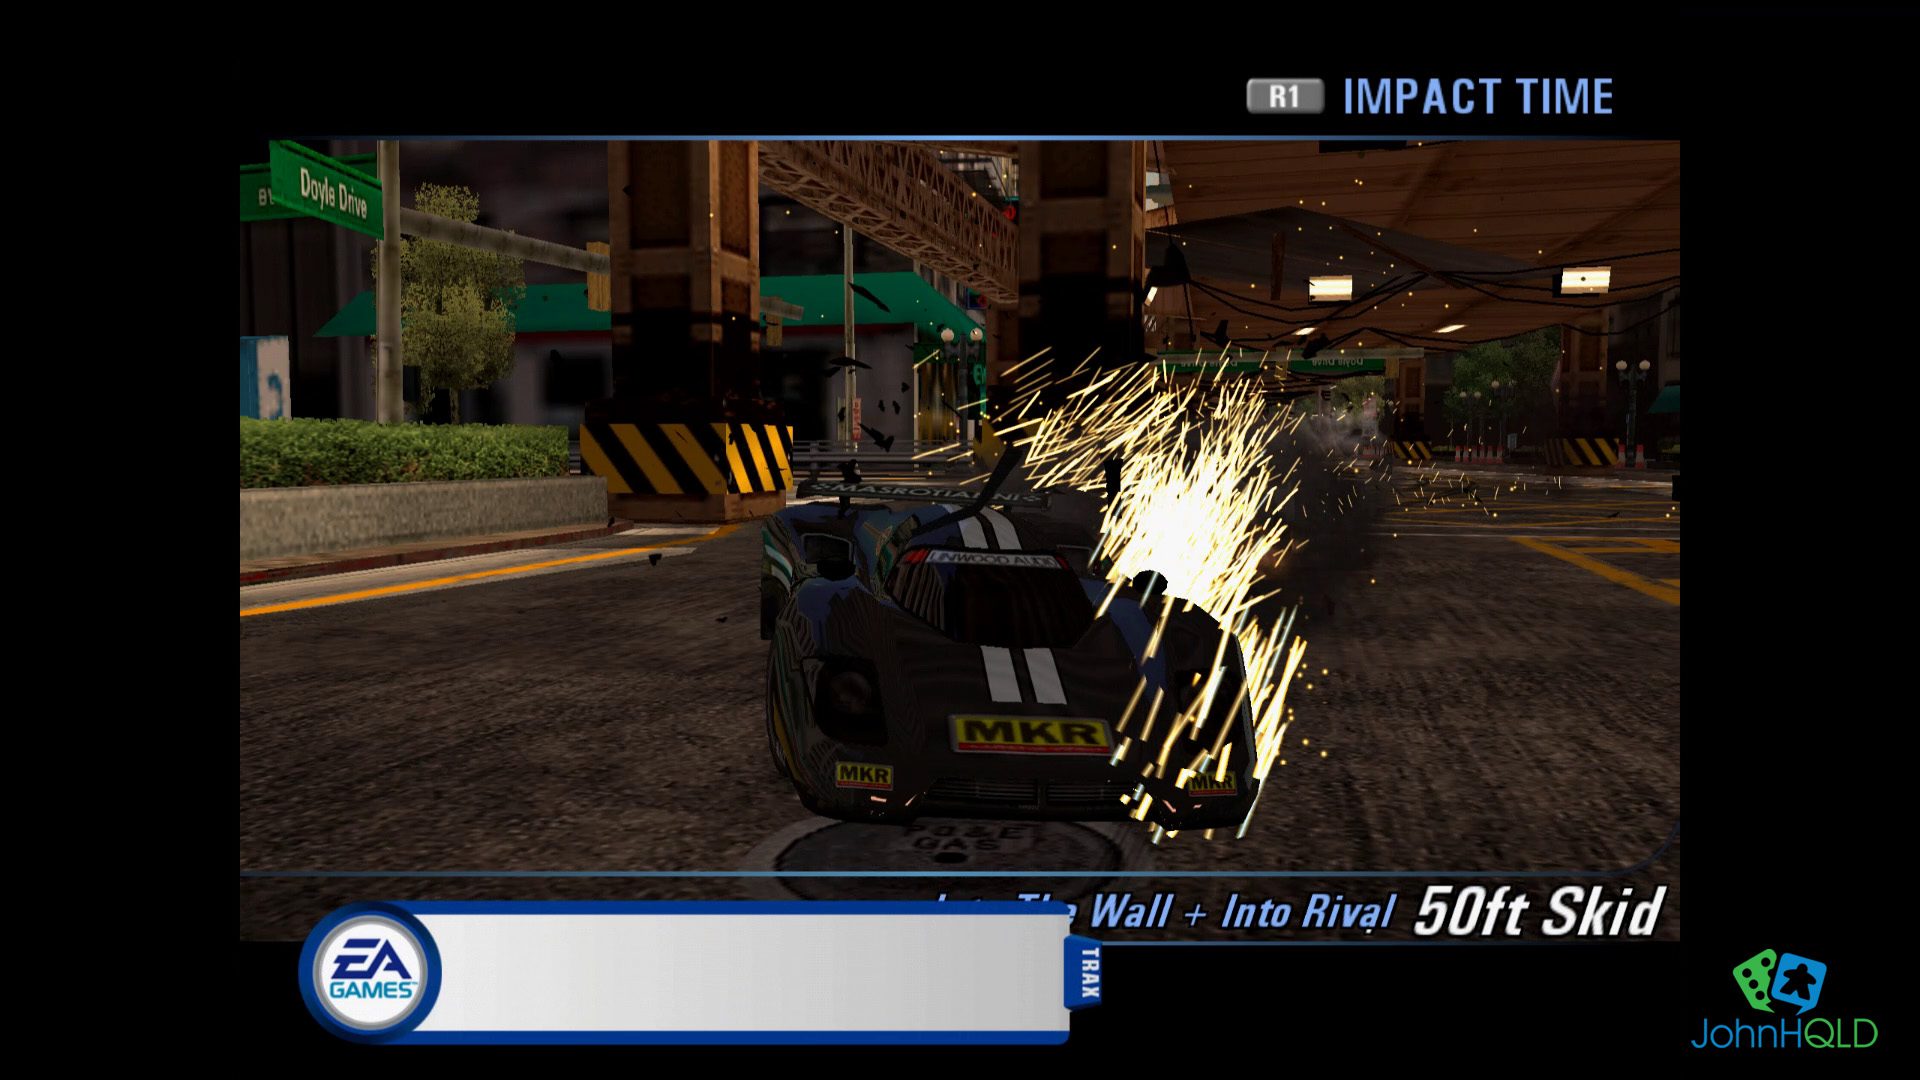 20221003 - Burnout 3 - We only just started the race and I am getting belted